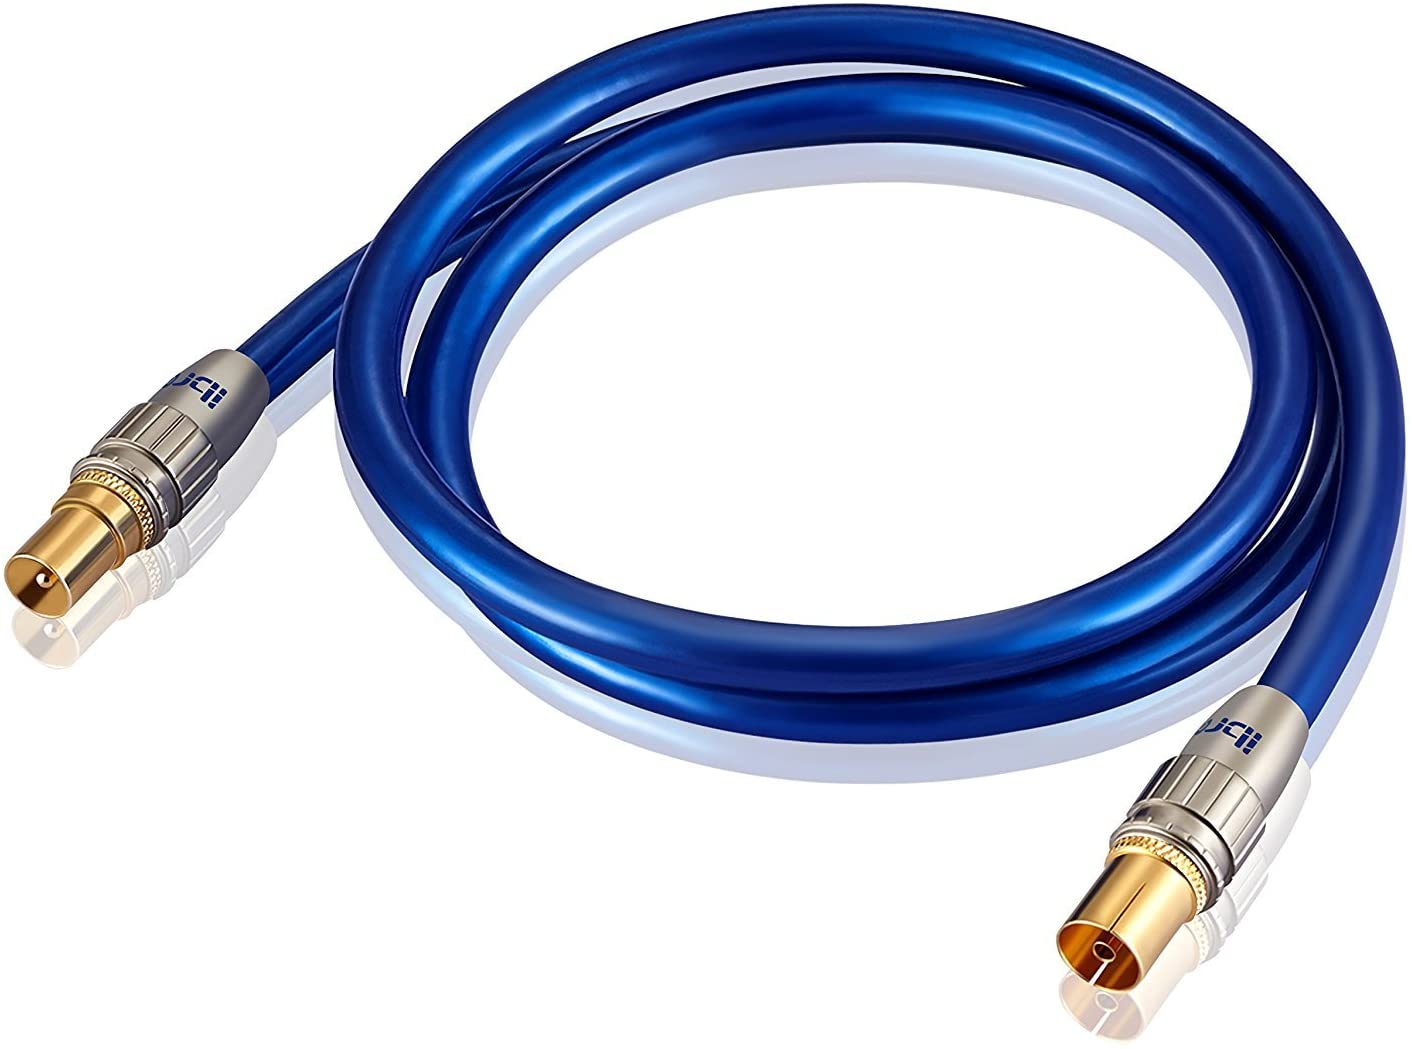 Pure OFC RF RG6 TV Aerial Coax Lead Gold Male to Female Extension Premium Cable - 10m IBRA Blue Gold Series